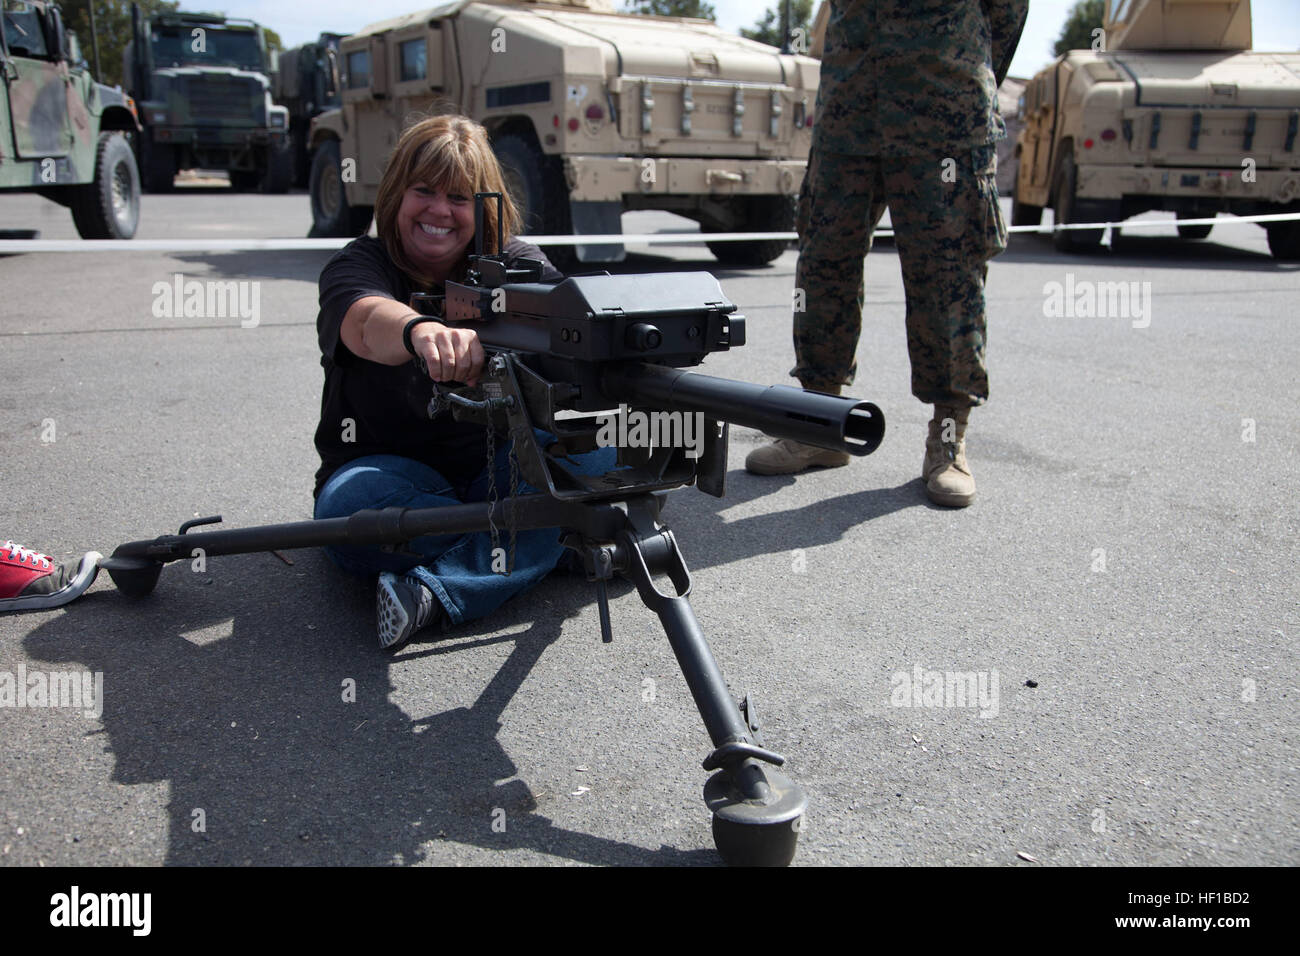 Janet Fliegel, wife of U.S. Marine Corps Sgt. Maj. Daniel Fliegel, Sgt. Maj. of Headquarters Battalion (HQBN), 1st Marine Division (1st MARDIV) poses with a MK 19 40 mm grenade machine gun during HQBN's Jane Wayne day aboard Camp Pendleton, Calif. June 22, 2013. Jane Wayne Day is an opportunity for family and friends of service members to participate in Marine Corps training, while strengthening family readiness through team building. (U.S. Marine Corps photo by Pfc. Adrianna Stalker, 1st Marine Division/Released) GI Joe and Jane Day Challenge 130622-M-HY842-093 Stock Photo